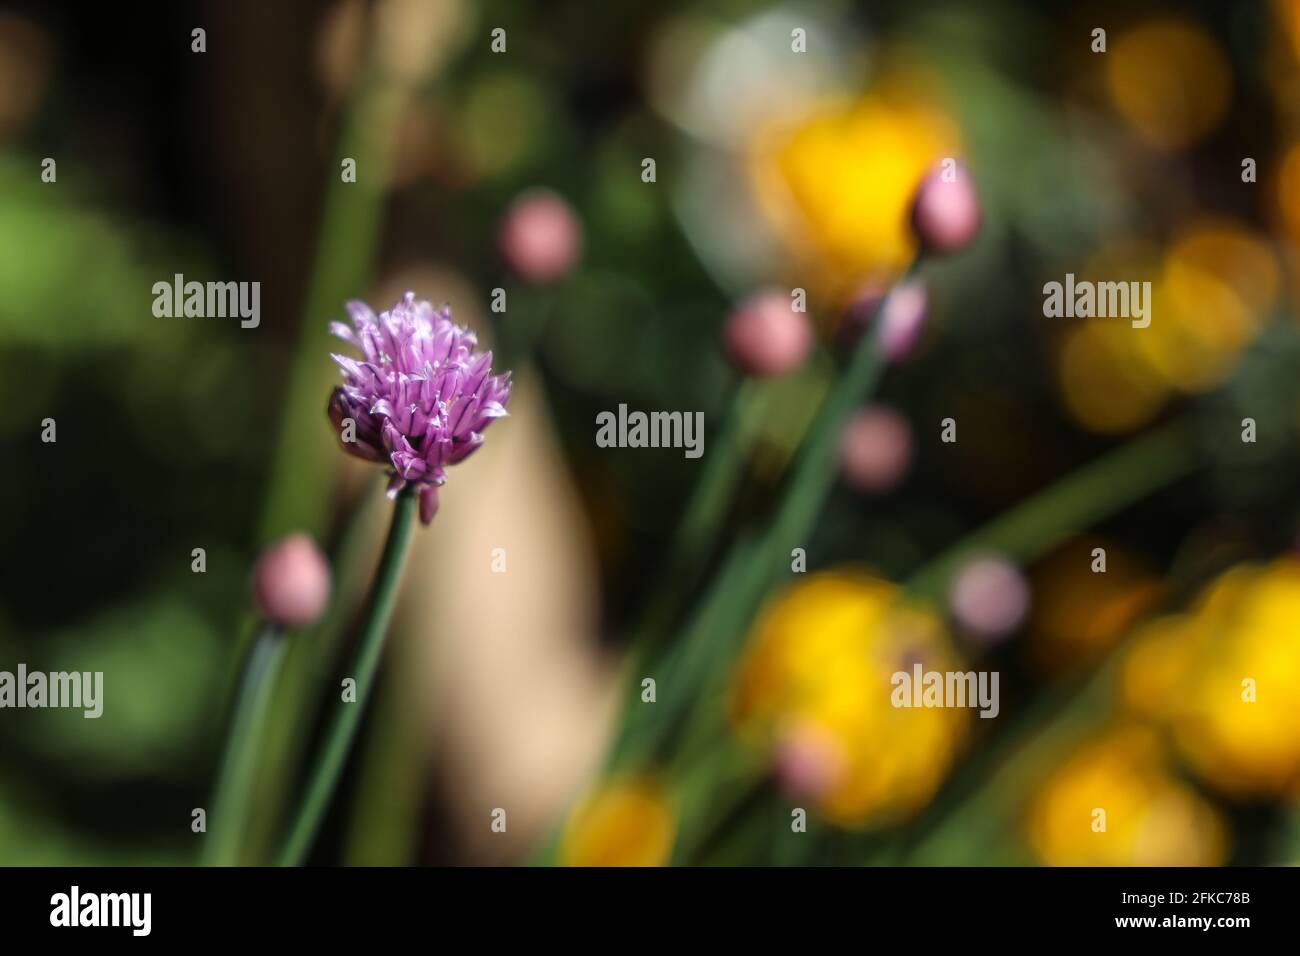 A single flowering chive with others in soft focus giving an abstract yet colourful image. The pale purple flowers are edible and can be used in salad Stock Photo